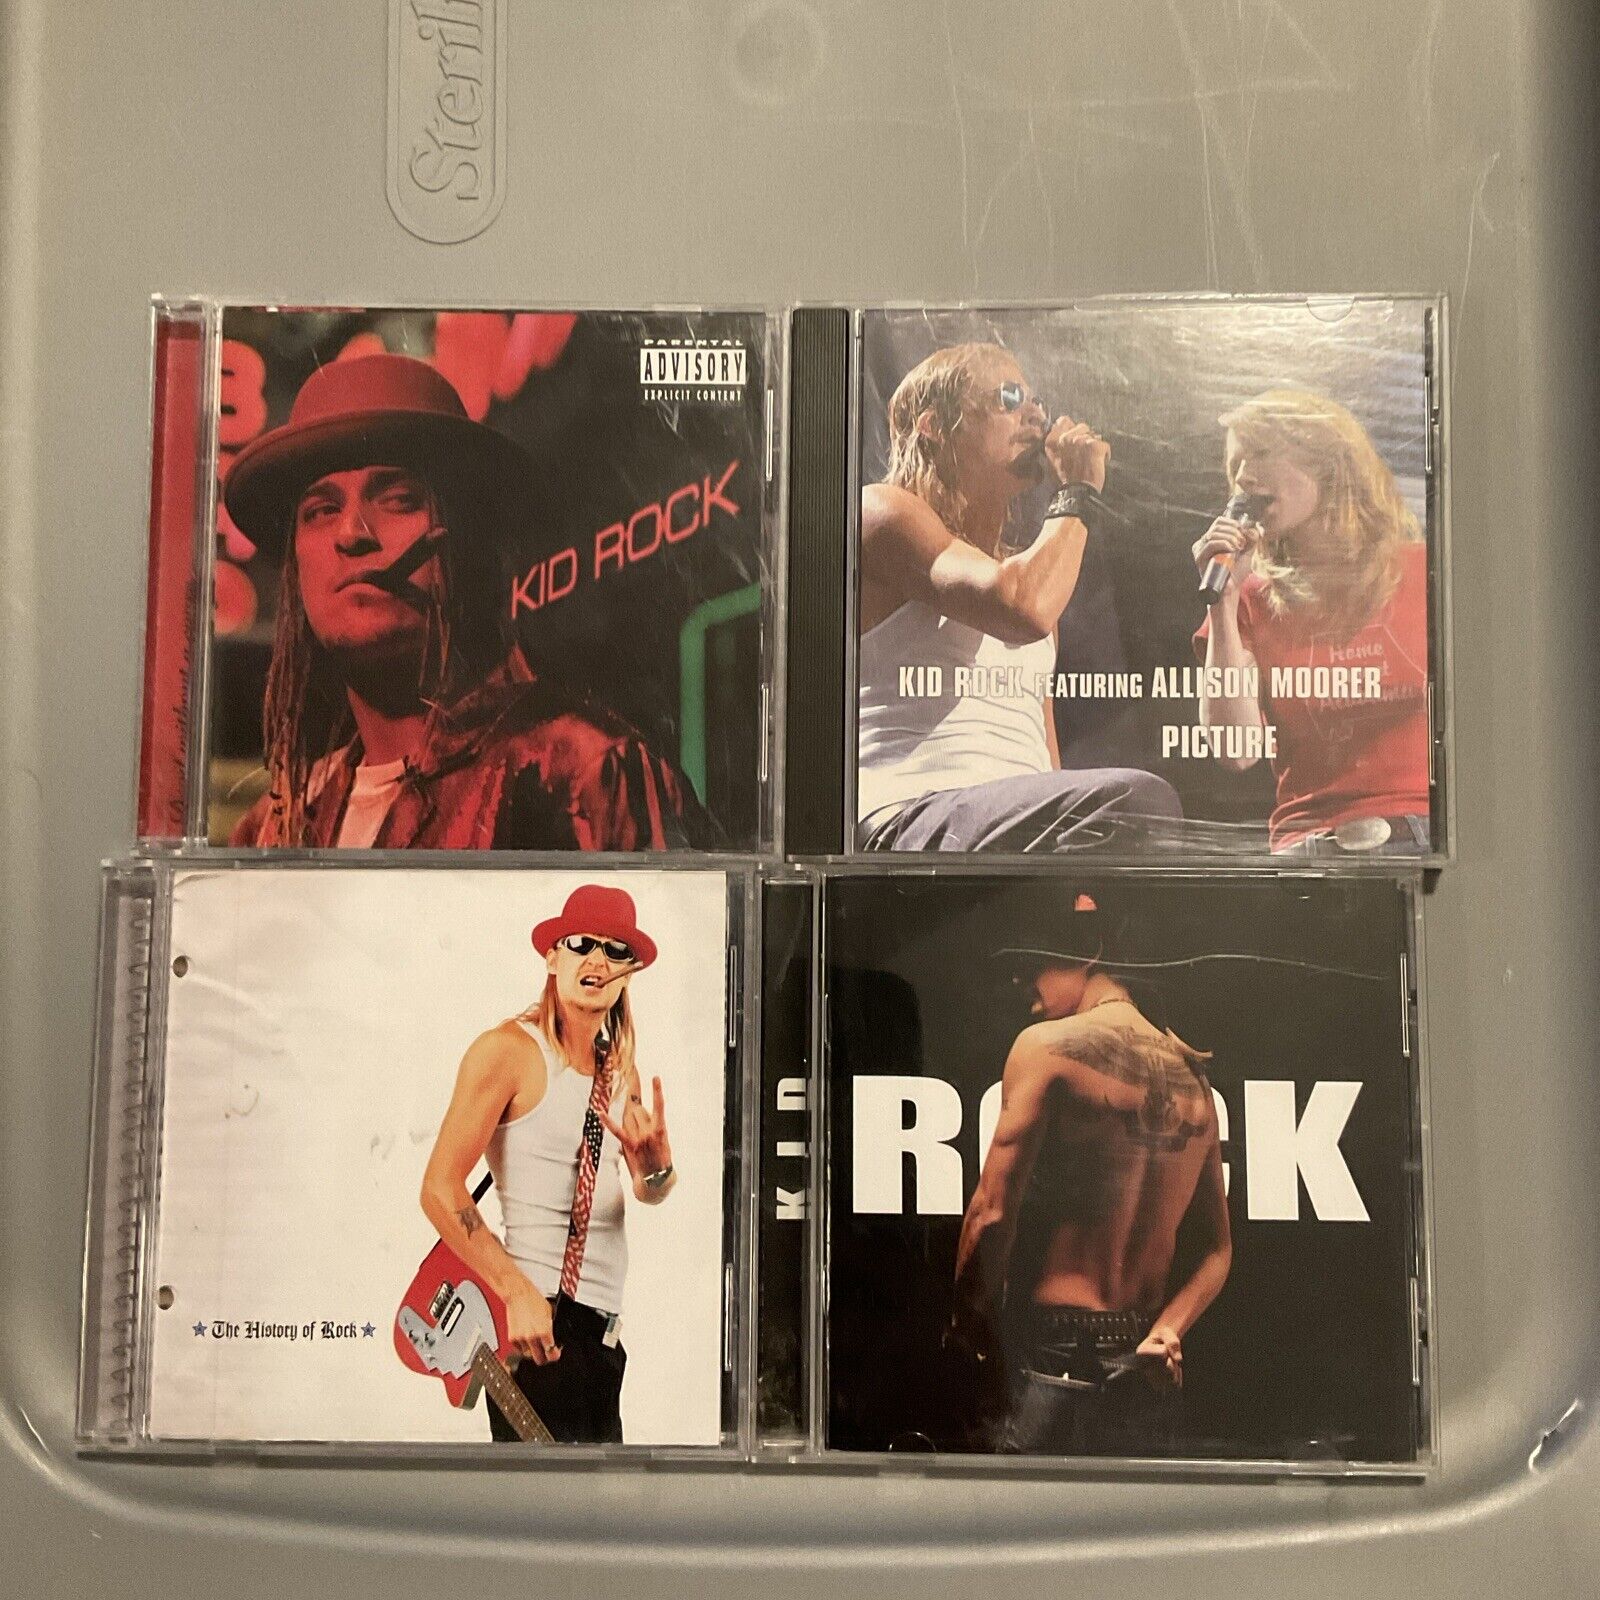 Kid Rock - Lot of 4 CDs - Kid Rock, History Of Rock + Devil Without A Cause B16